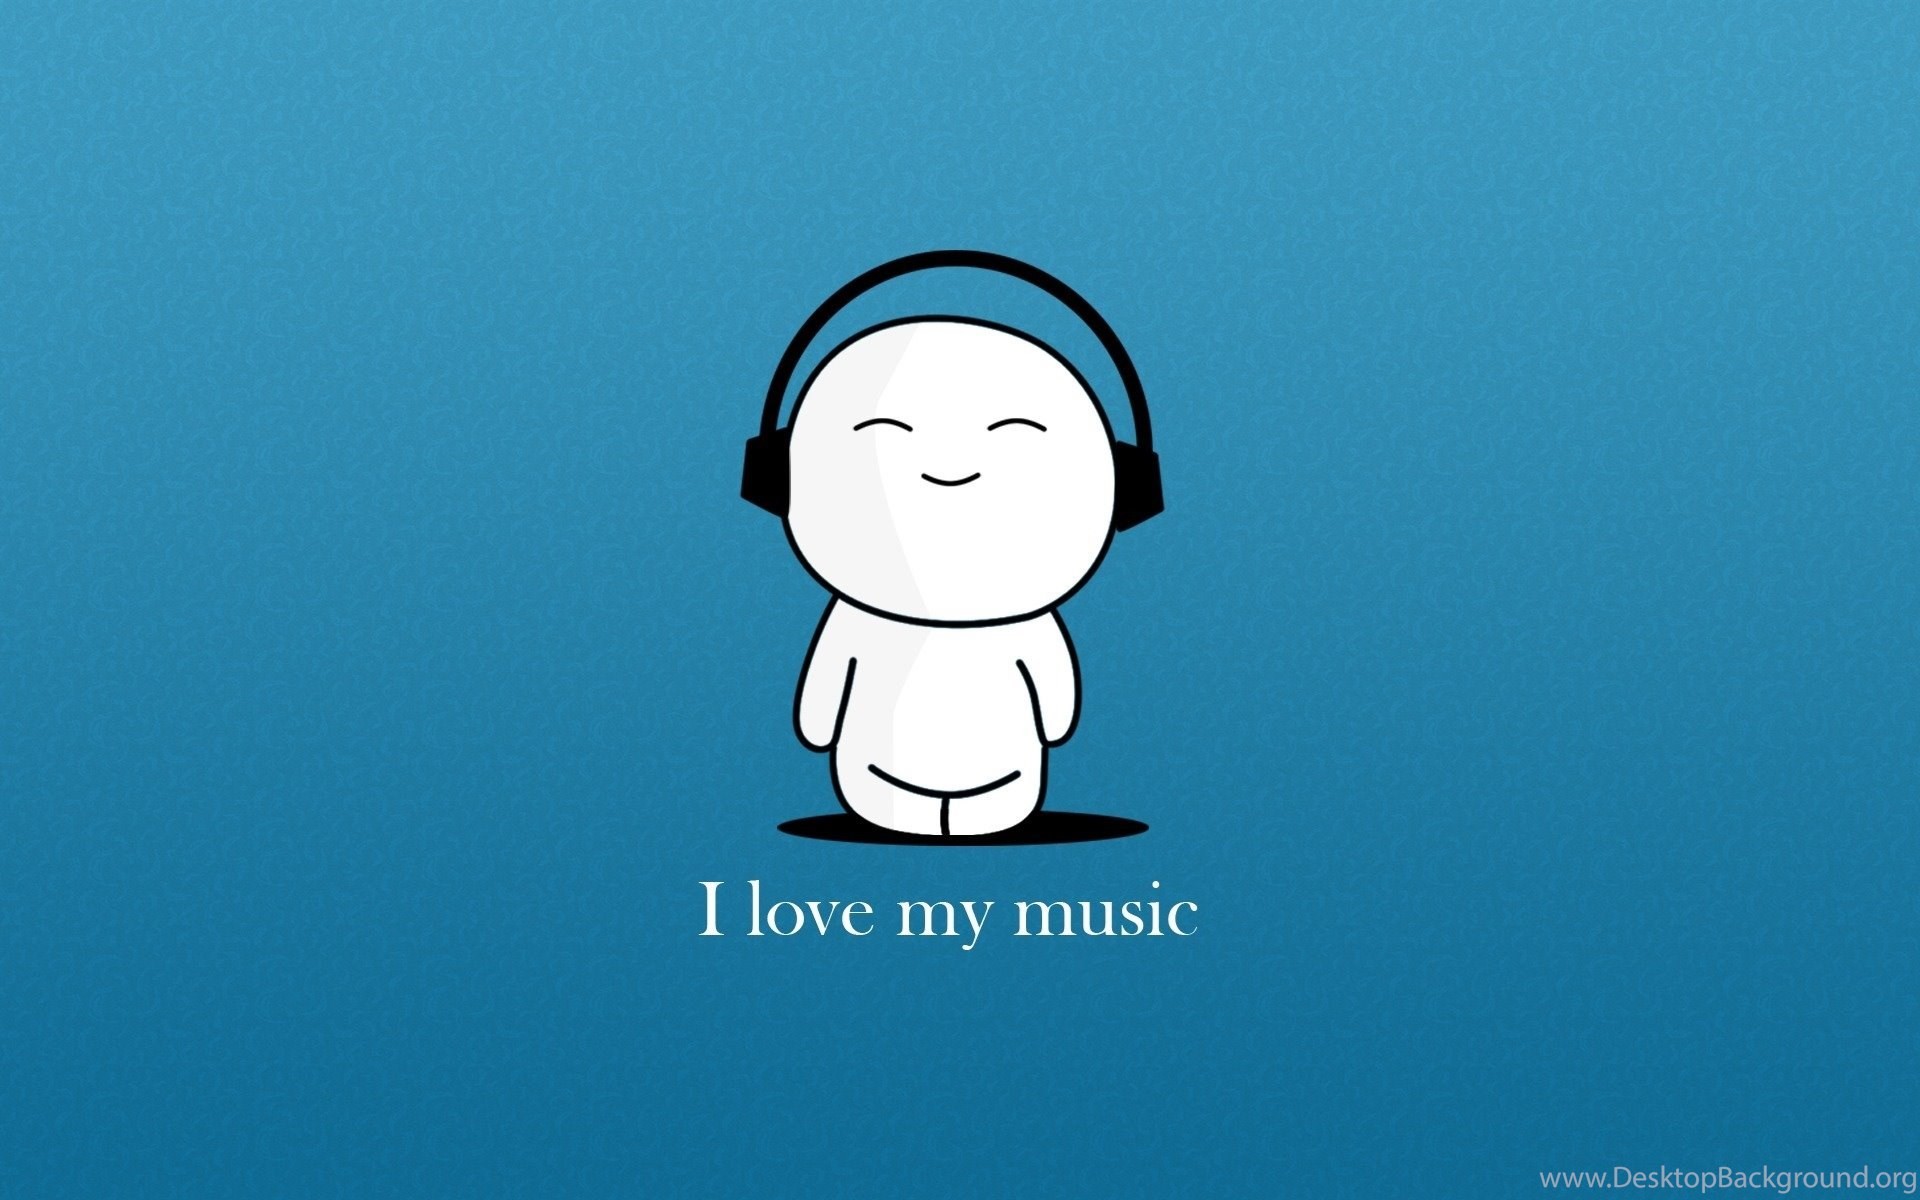 I Cinta Musik - Funny Cartoon Wallpapers With Quotes - 1680x1050 Wallpaper  